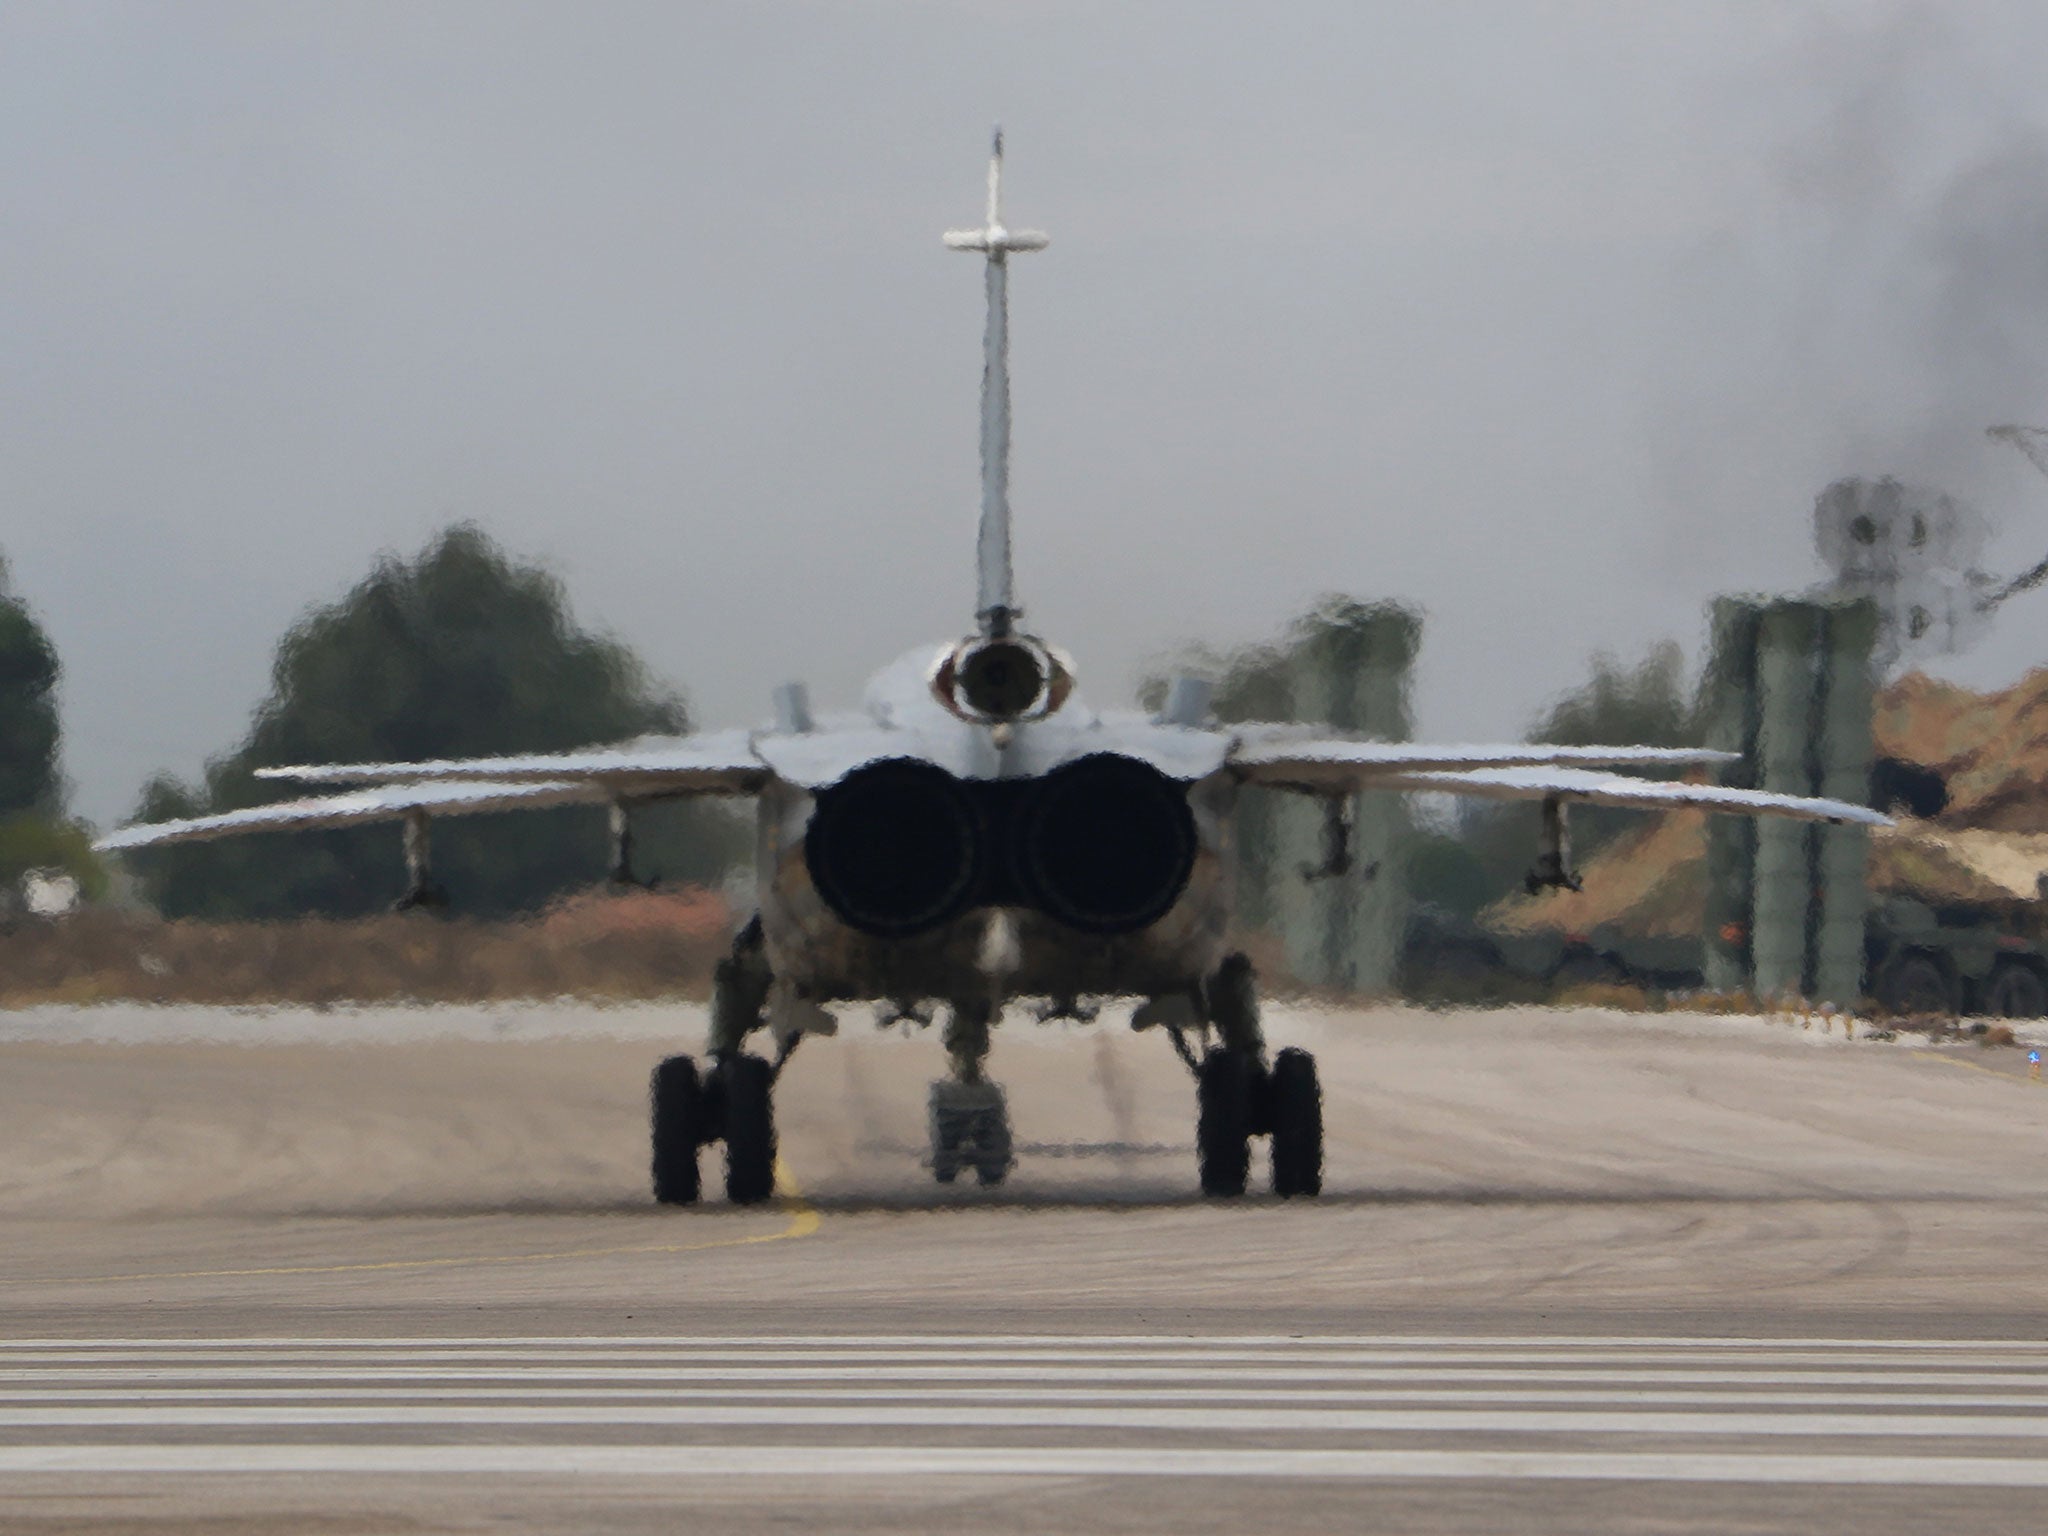 A Russian jet at the Hmeimim military base in Latakia province, Syria